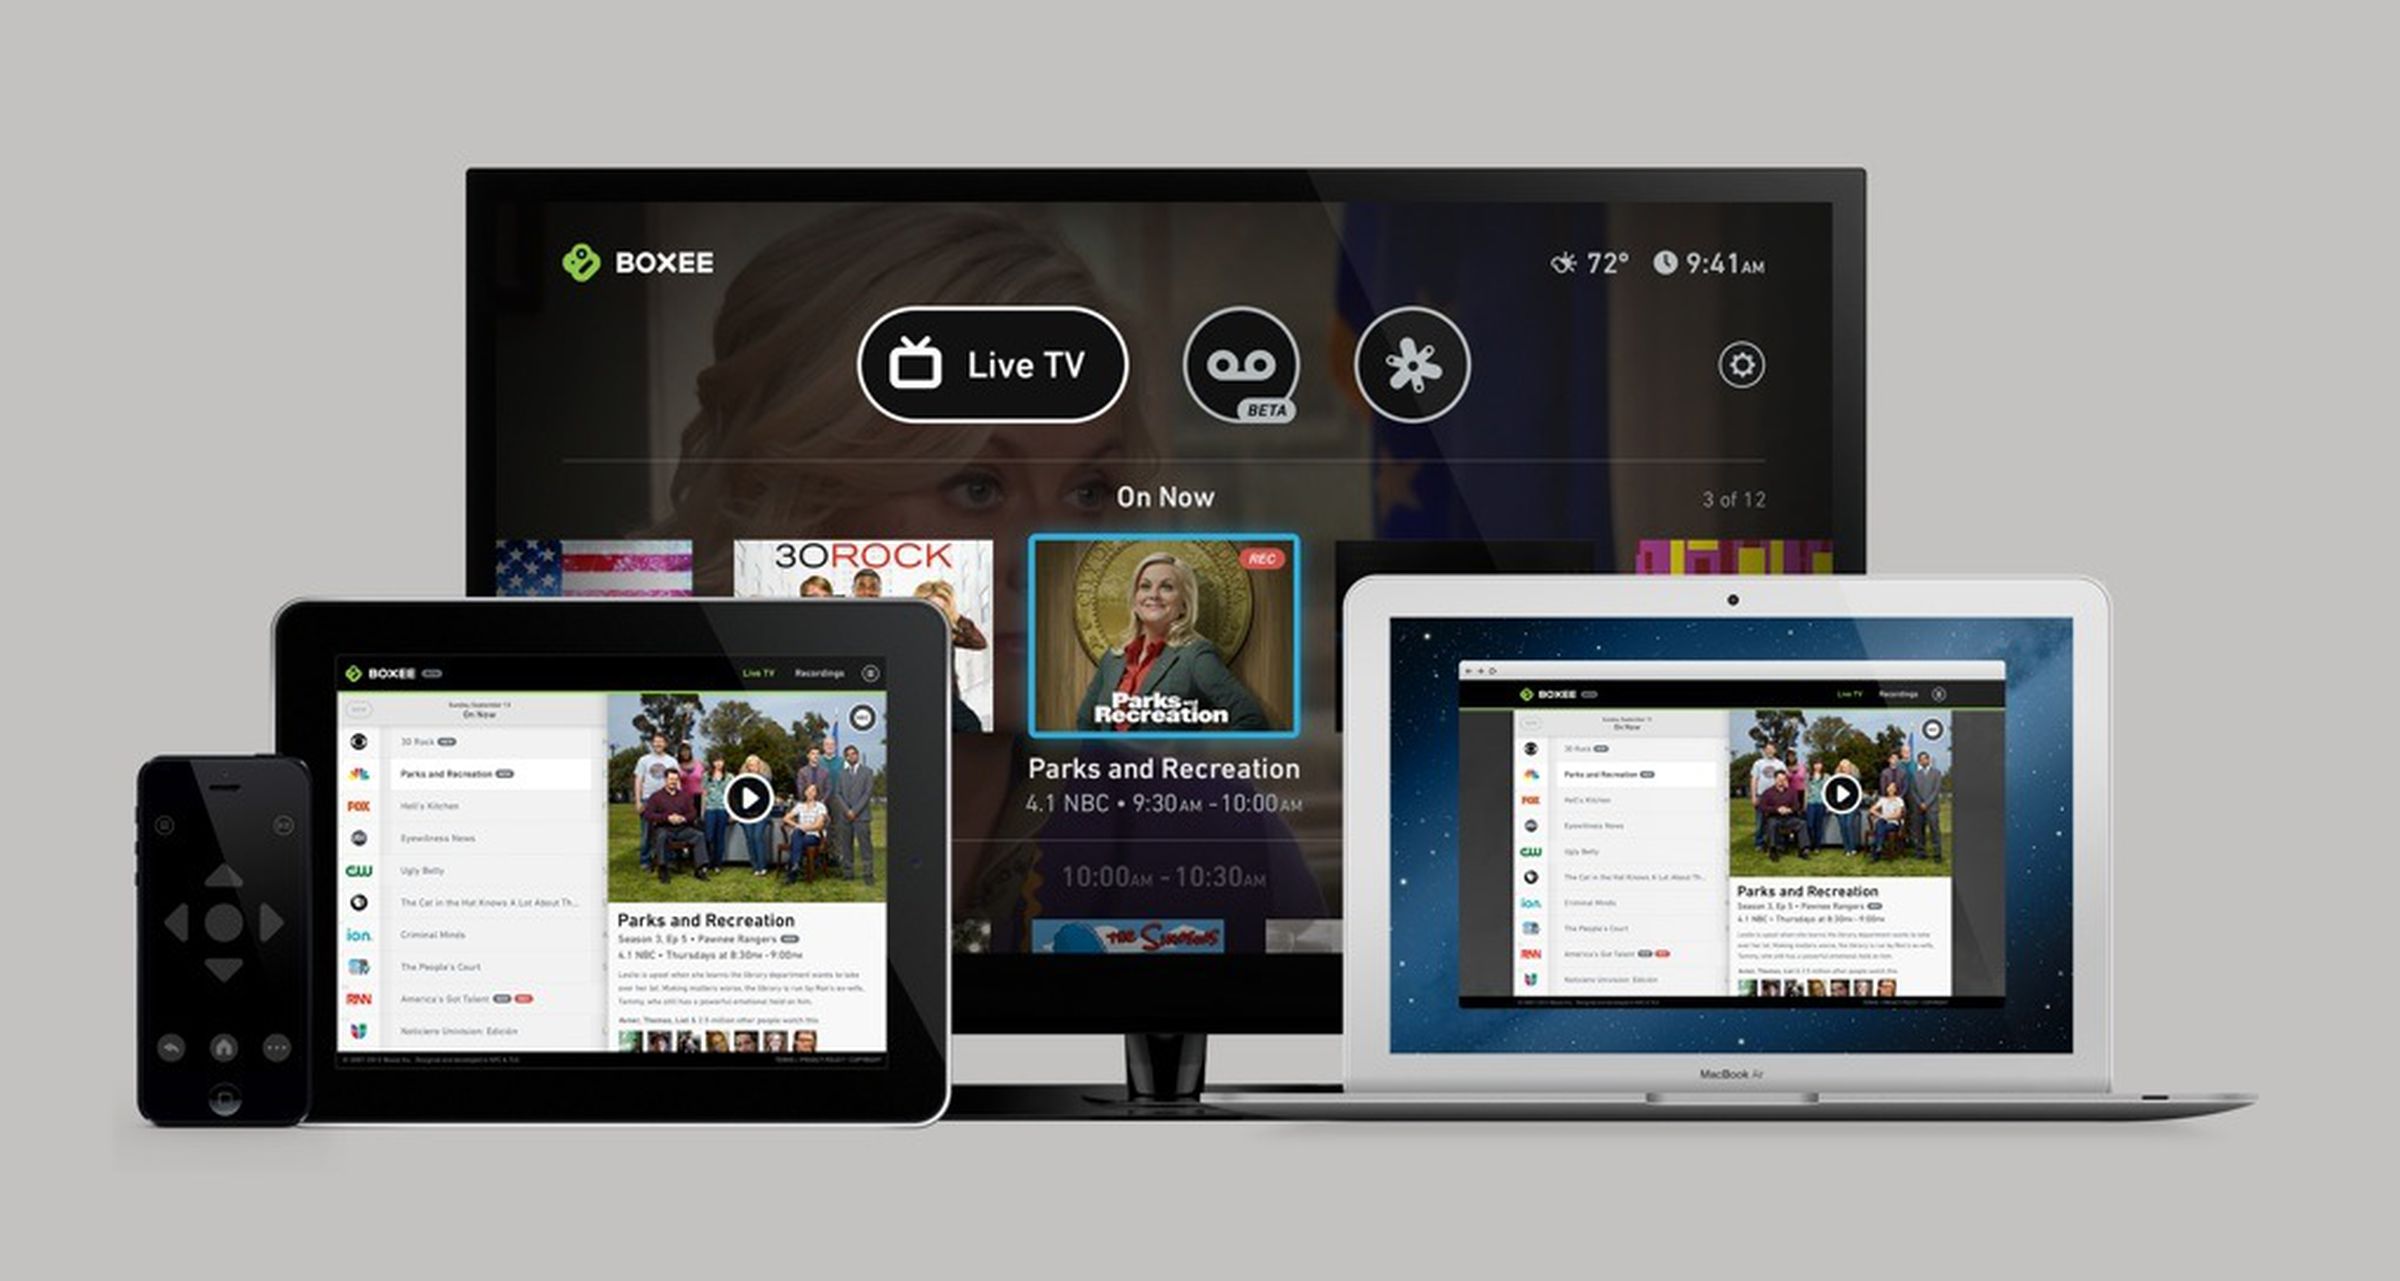 Boxee TV press images